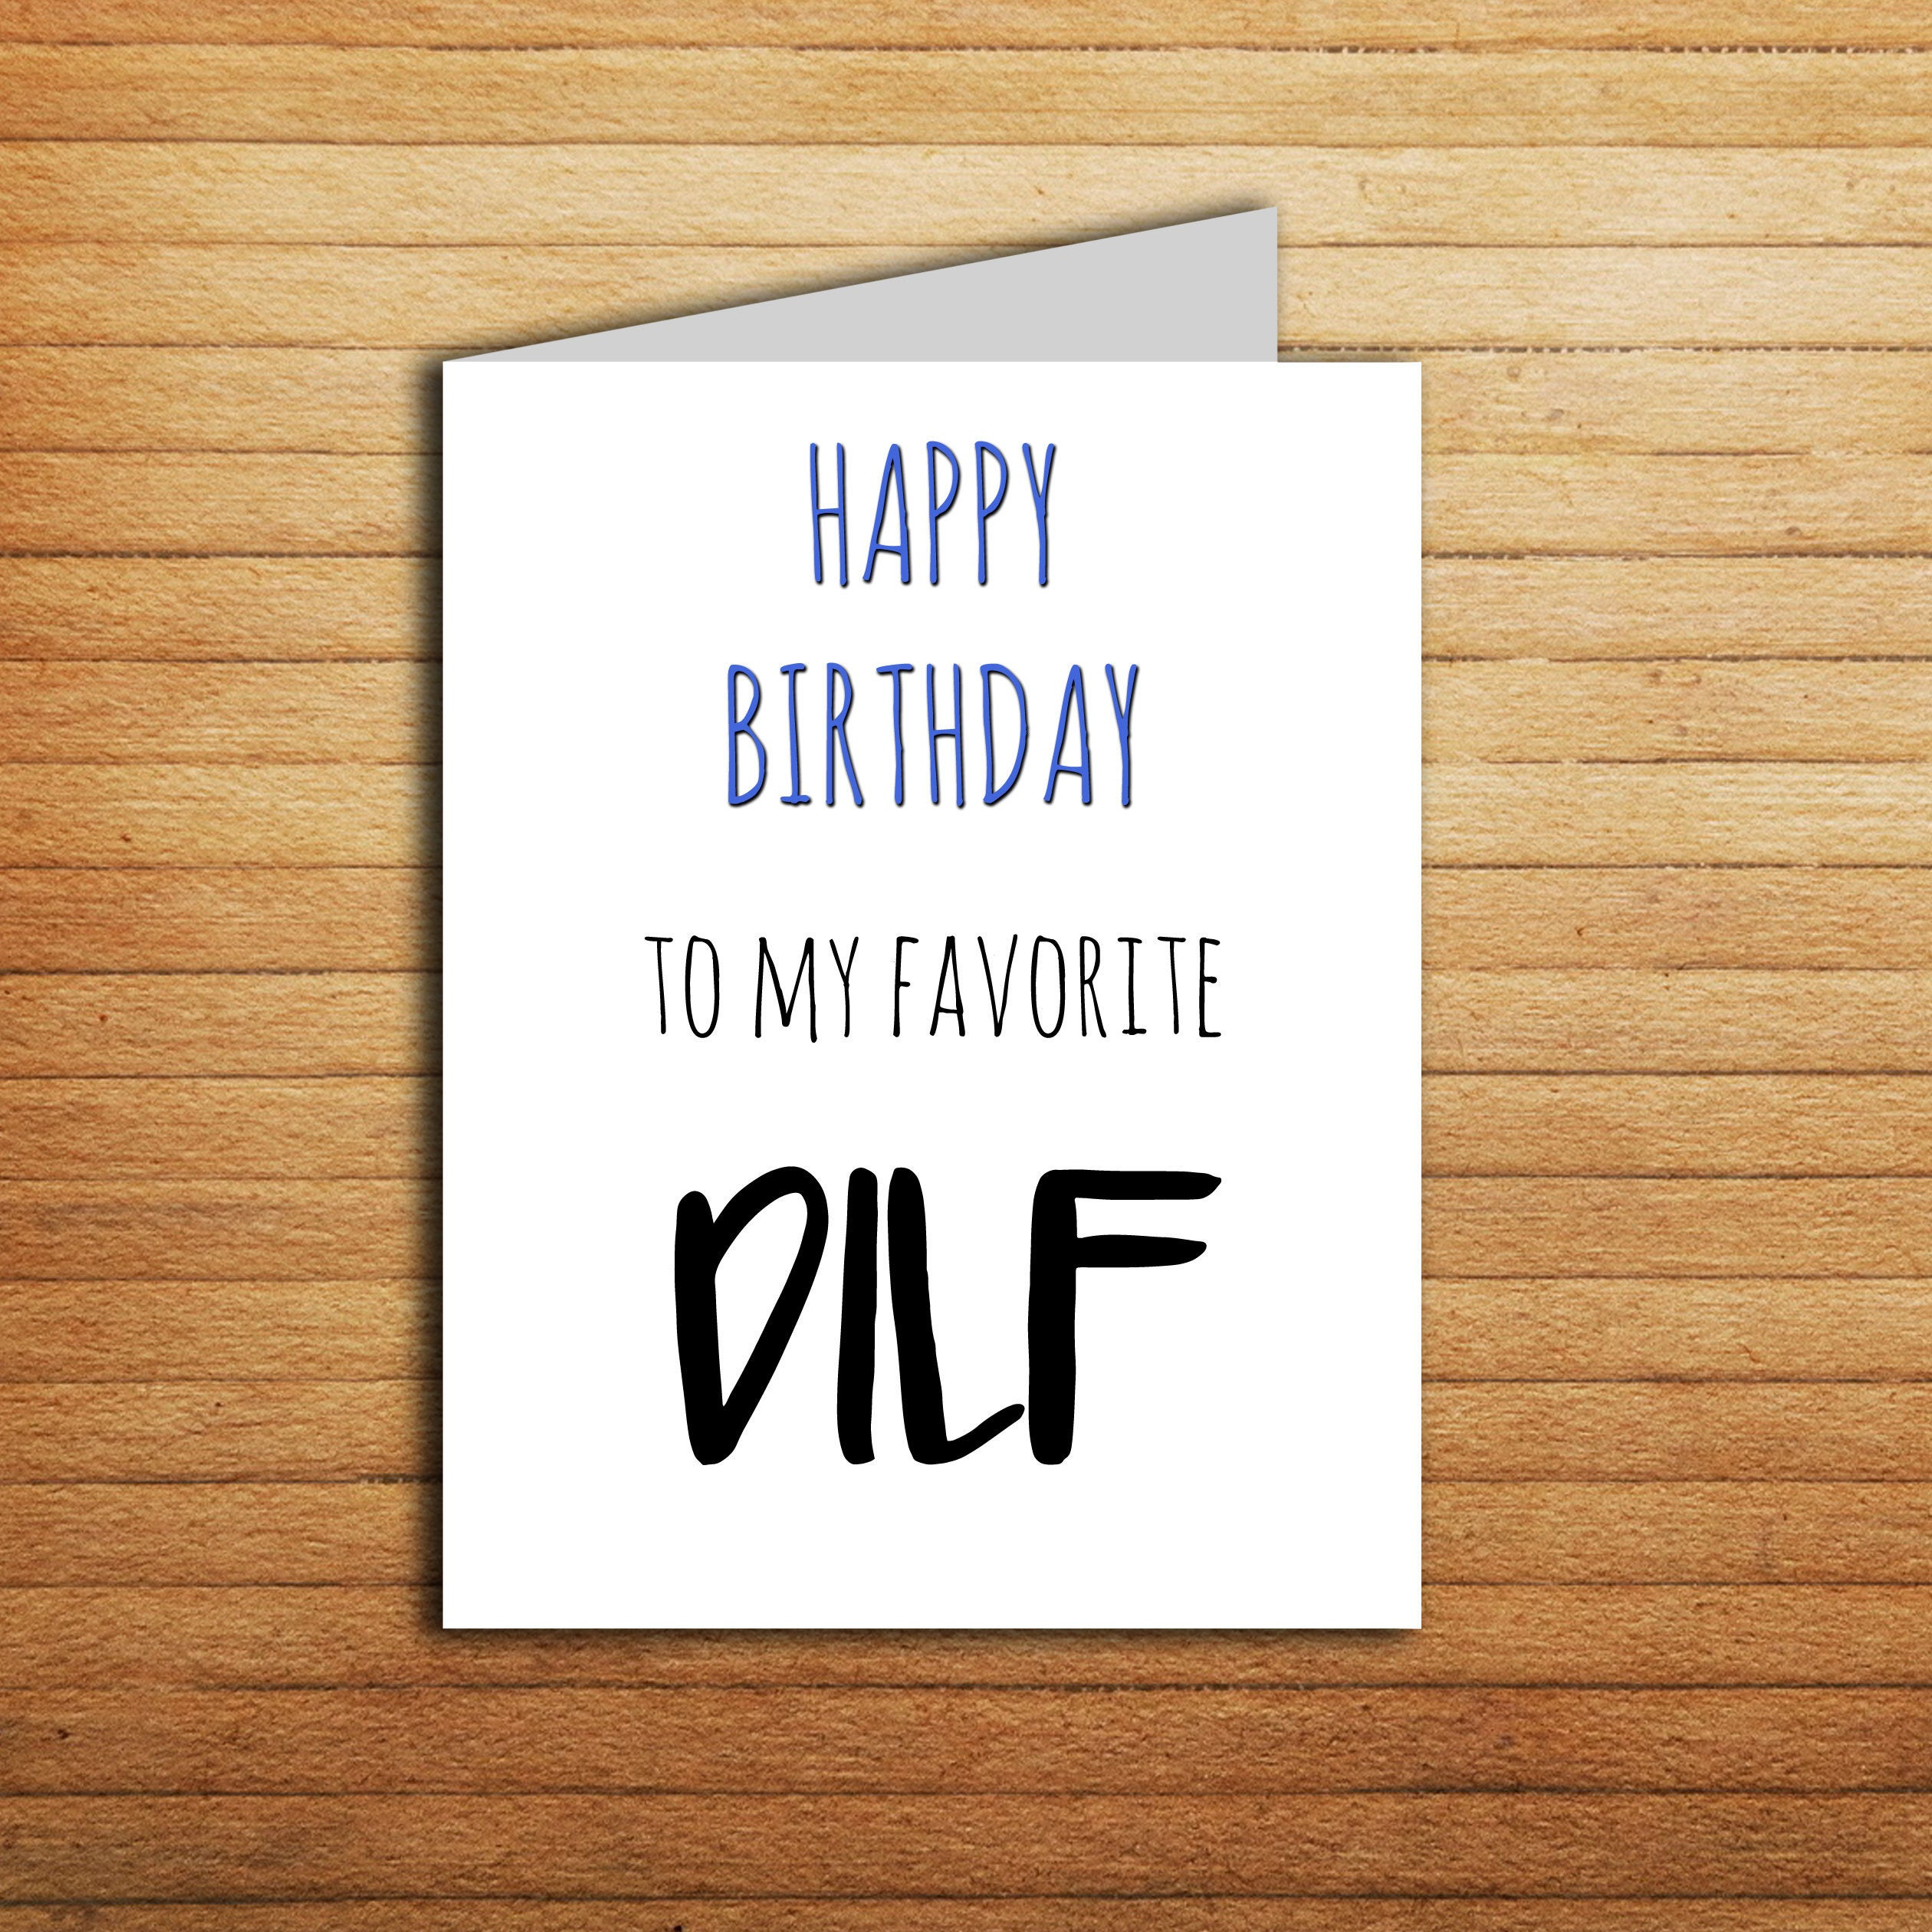 Funny Birthday Card Ideas For Boyfriend Dilf Card Funny Birthday Card For Boyfriend Gift From Girlfriend Sexy Rude Naughty Cards For Husband Printable Mature Male Hub Bday Card